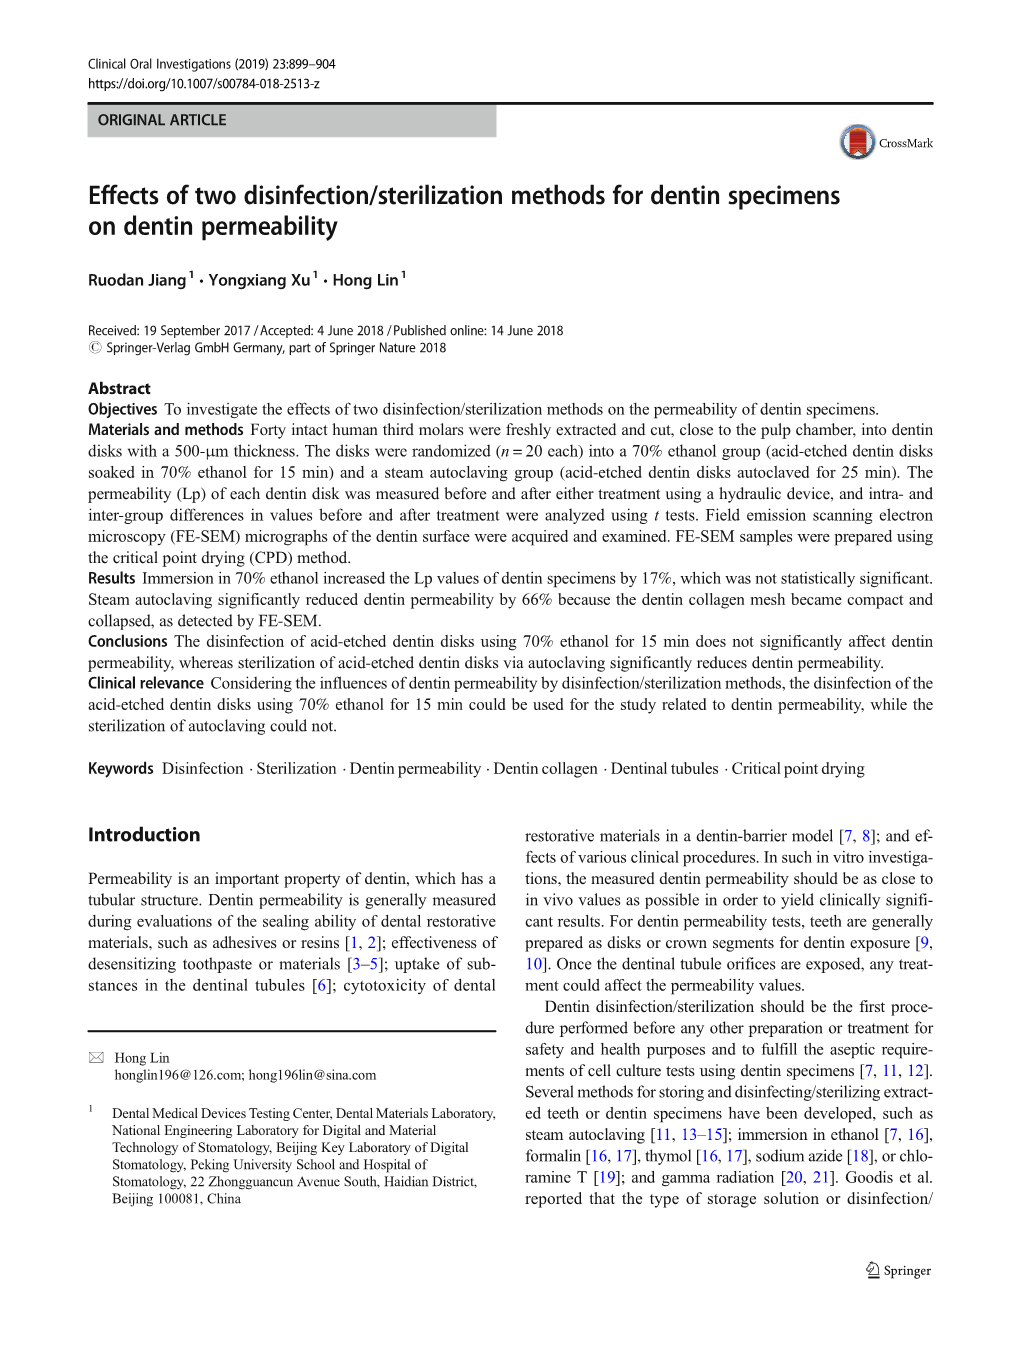 Effects of Two Disinfection/Sterilization Methods for Dentin Specimens on Dentin Permeability